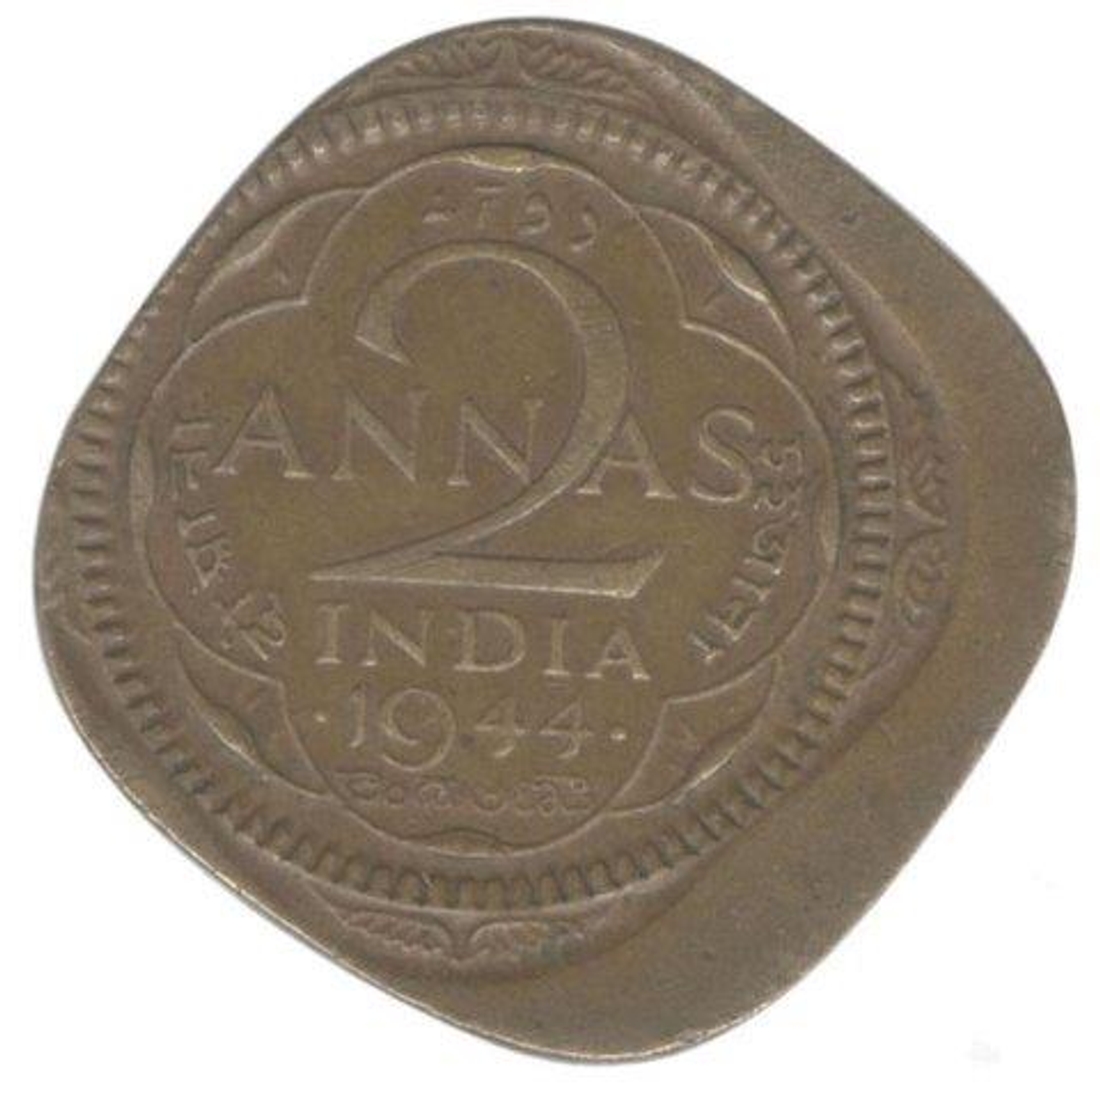 Error Nickel Brass Two Annas Coin of  King George VI of Bombay Mint of 1944.